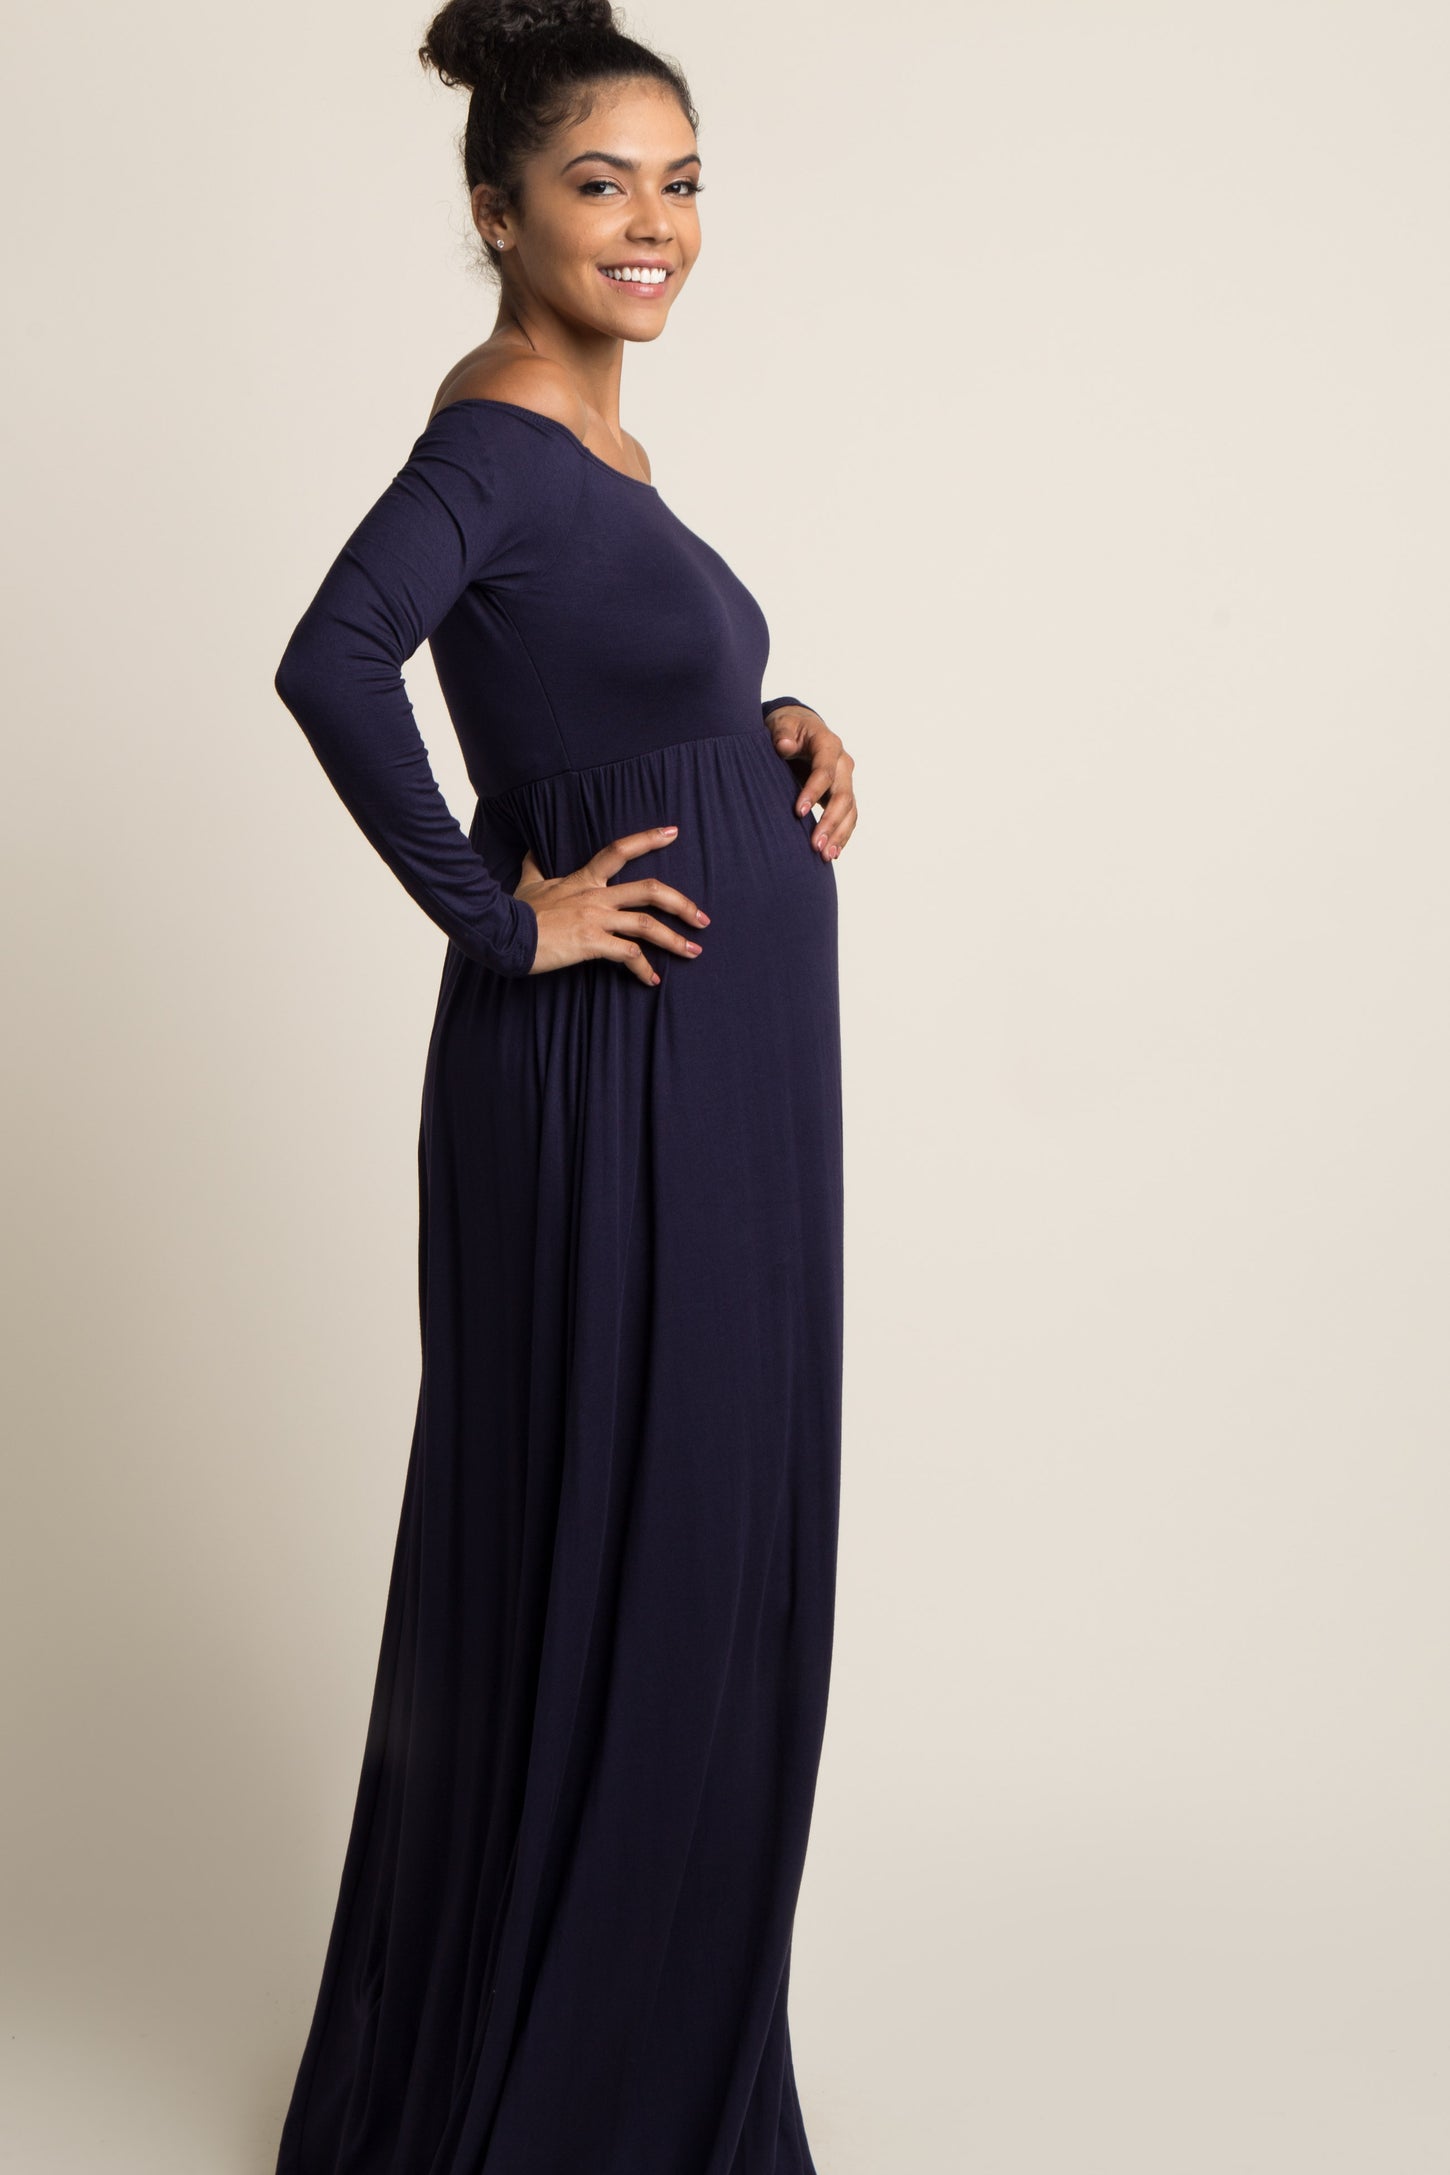 PinkBlush Tall Navy Blue Solid Off Shoulder Maternity Maxi Dress